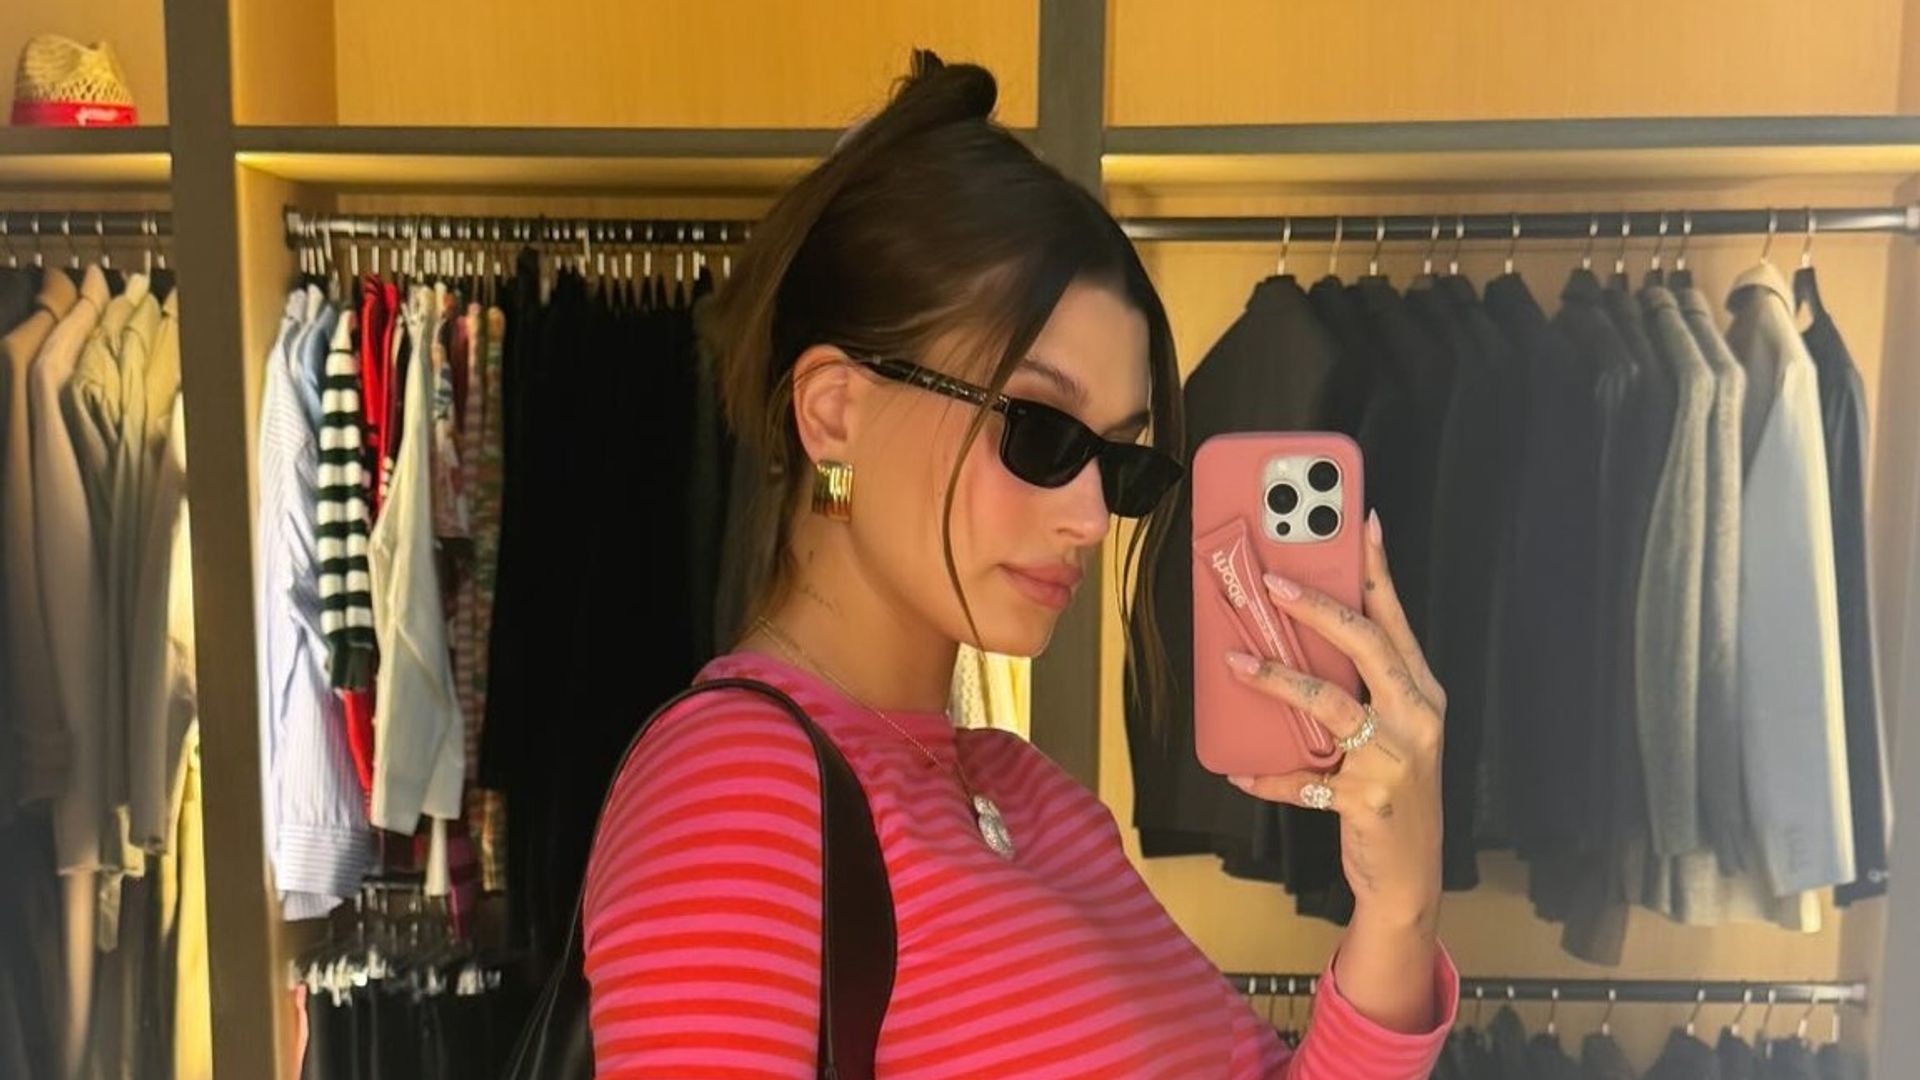 Hailey Bieber wearing a stripey pink top and black trousers